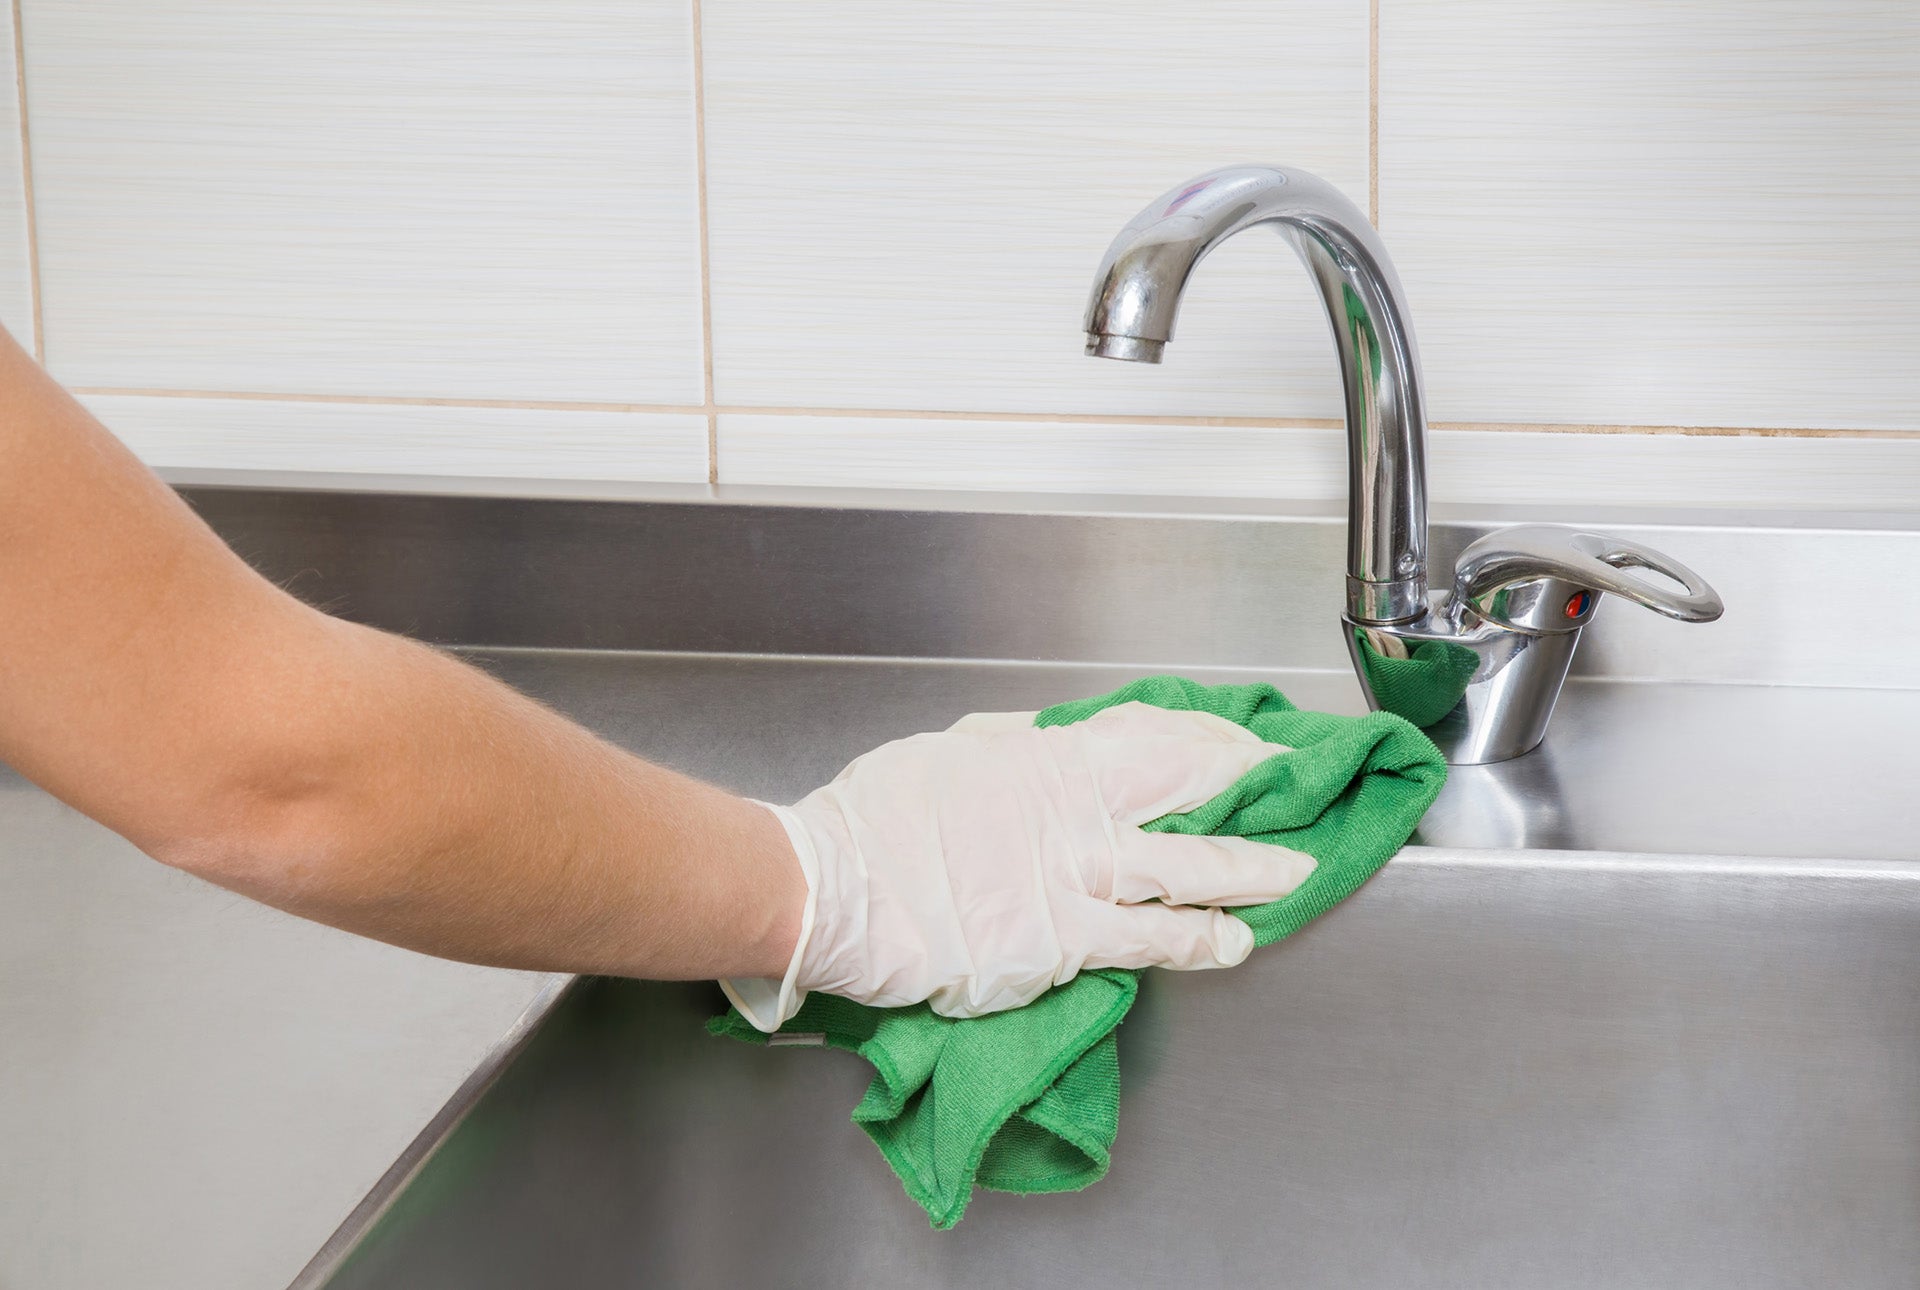 Understanding the Colour Coding for Cleaning